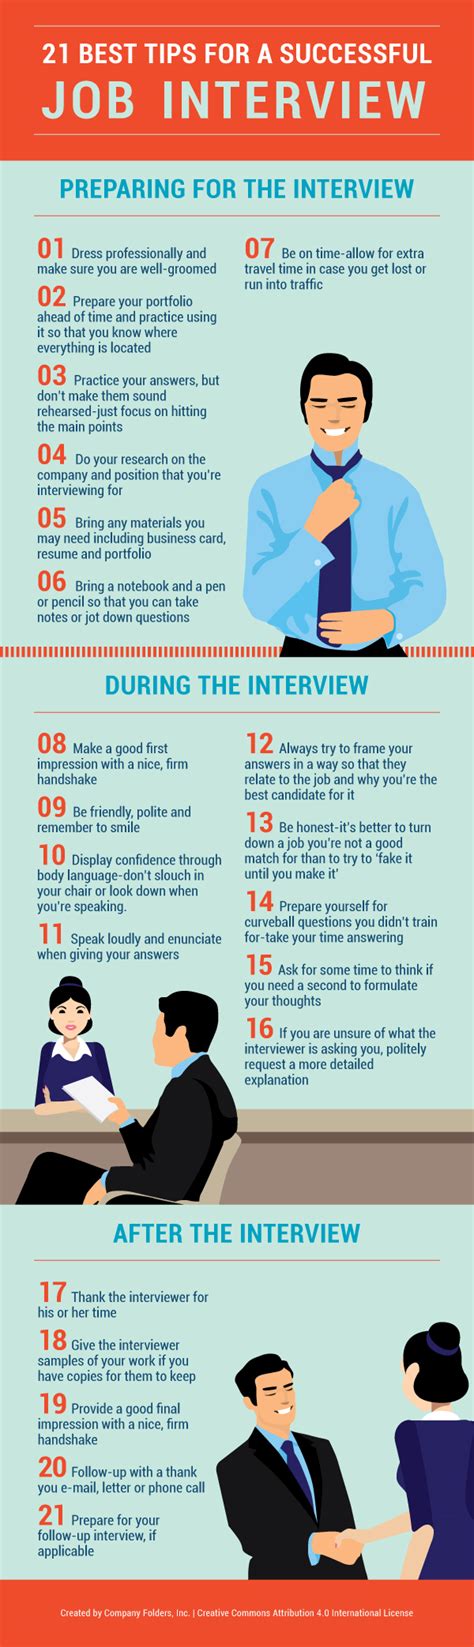 Tips For A Successful Job Interview Content Geek